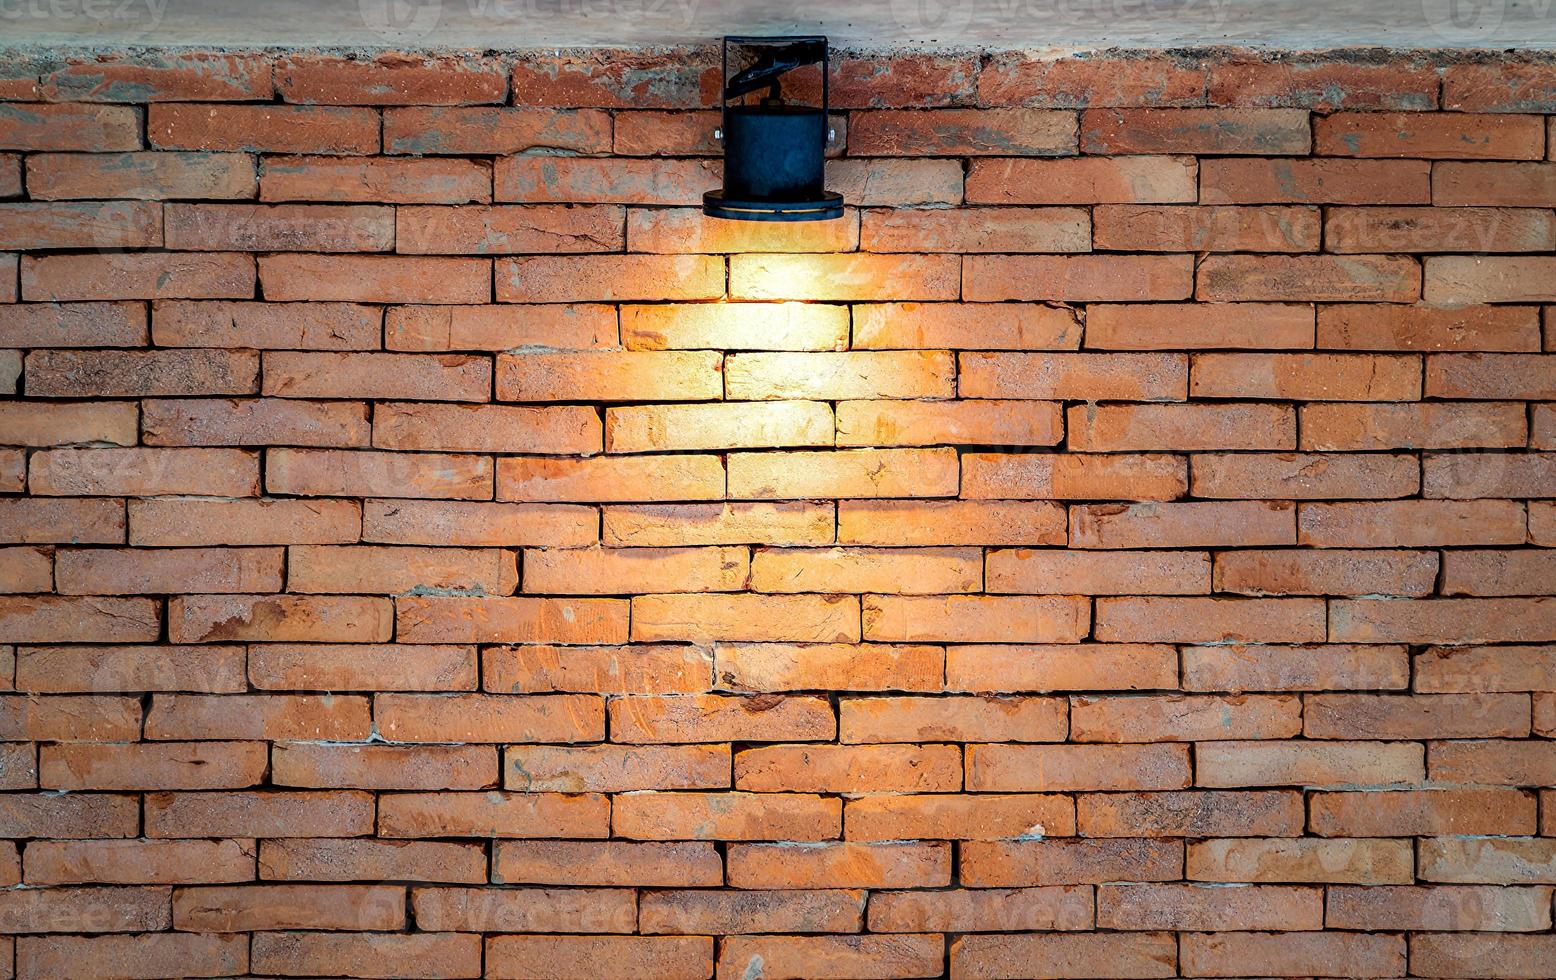 Brickwall backdrop with the tungsten lights from spotlight for Art Exhibition or vintage classic display product background. photo